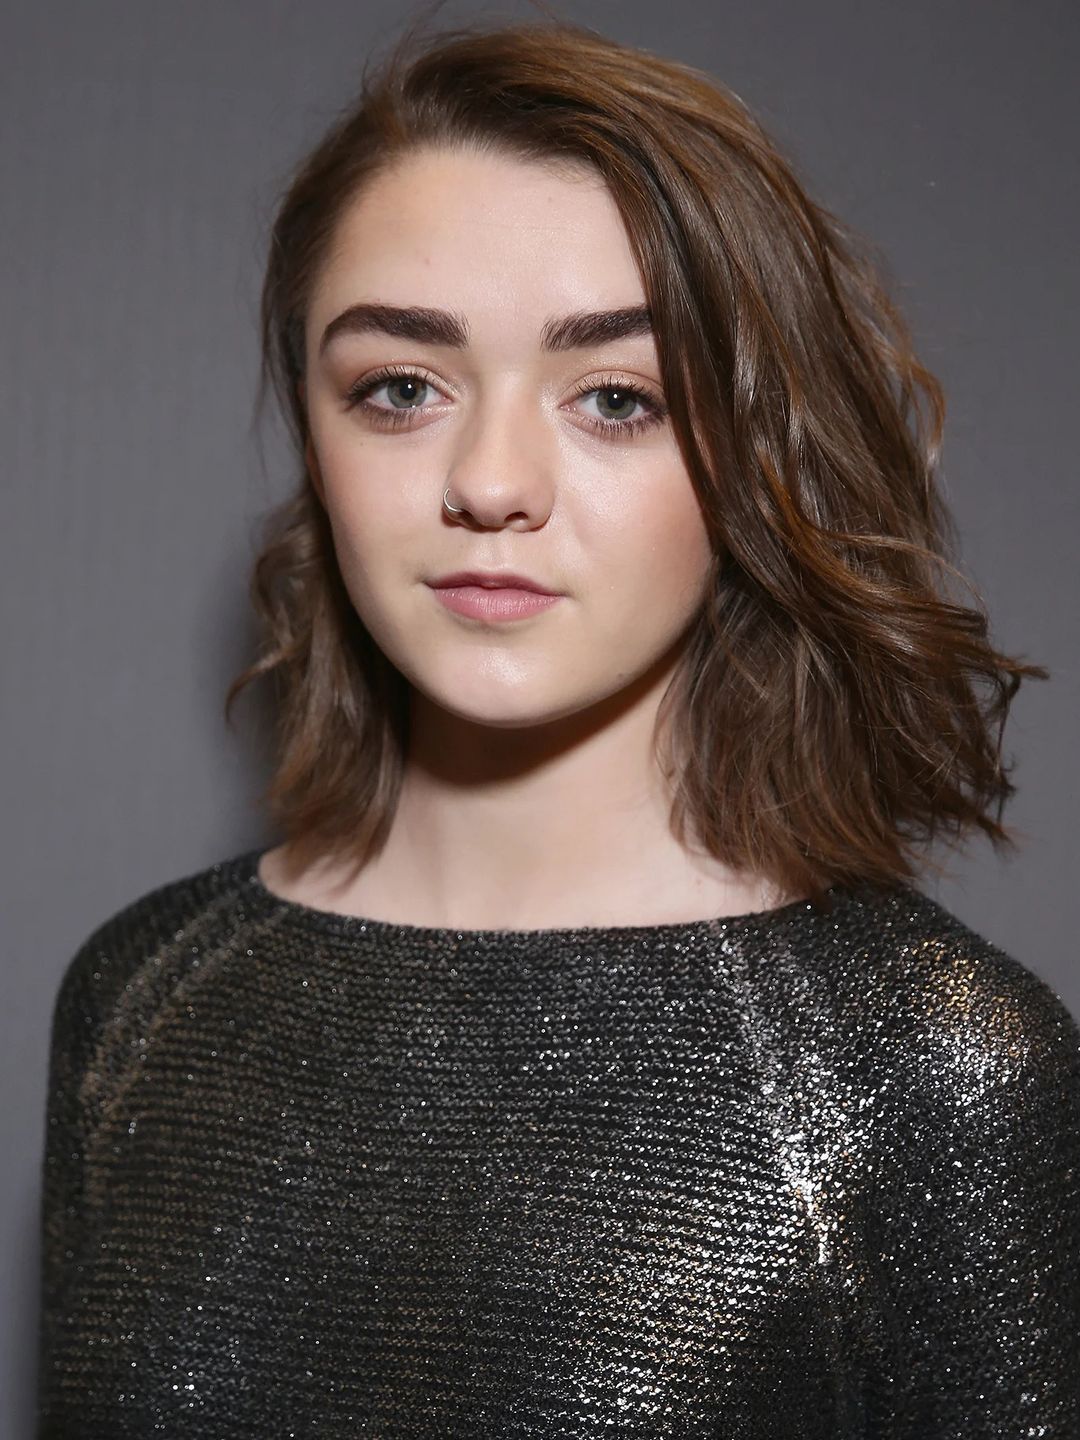 Maisie Williams young pics